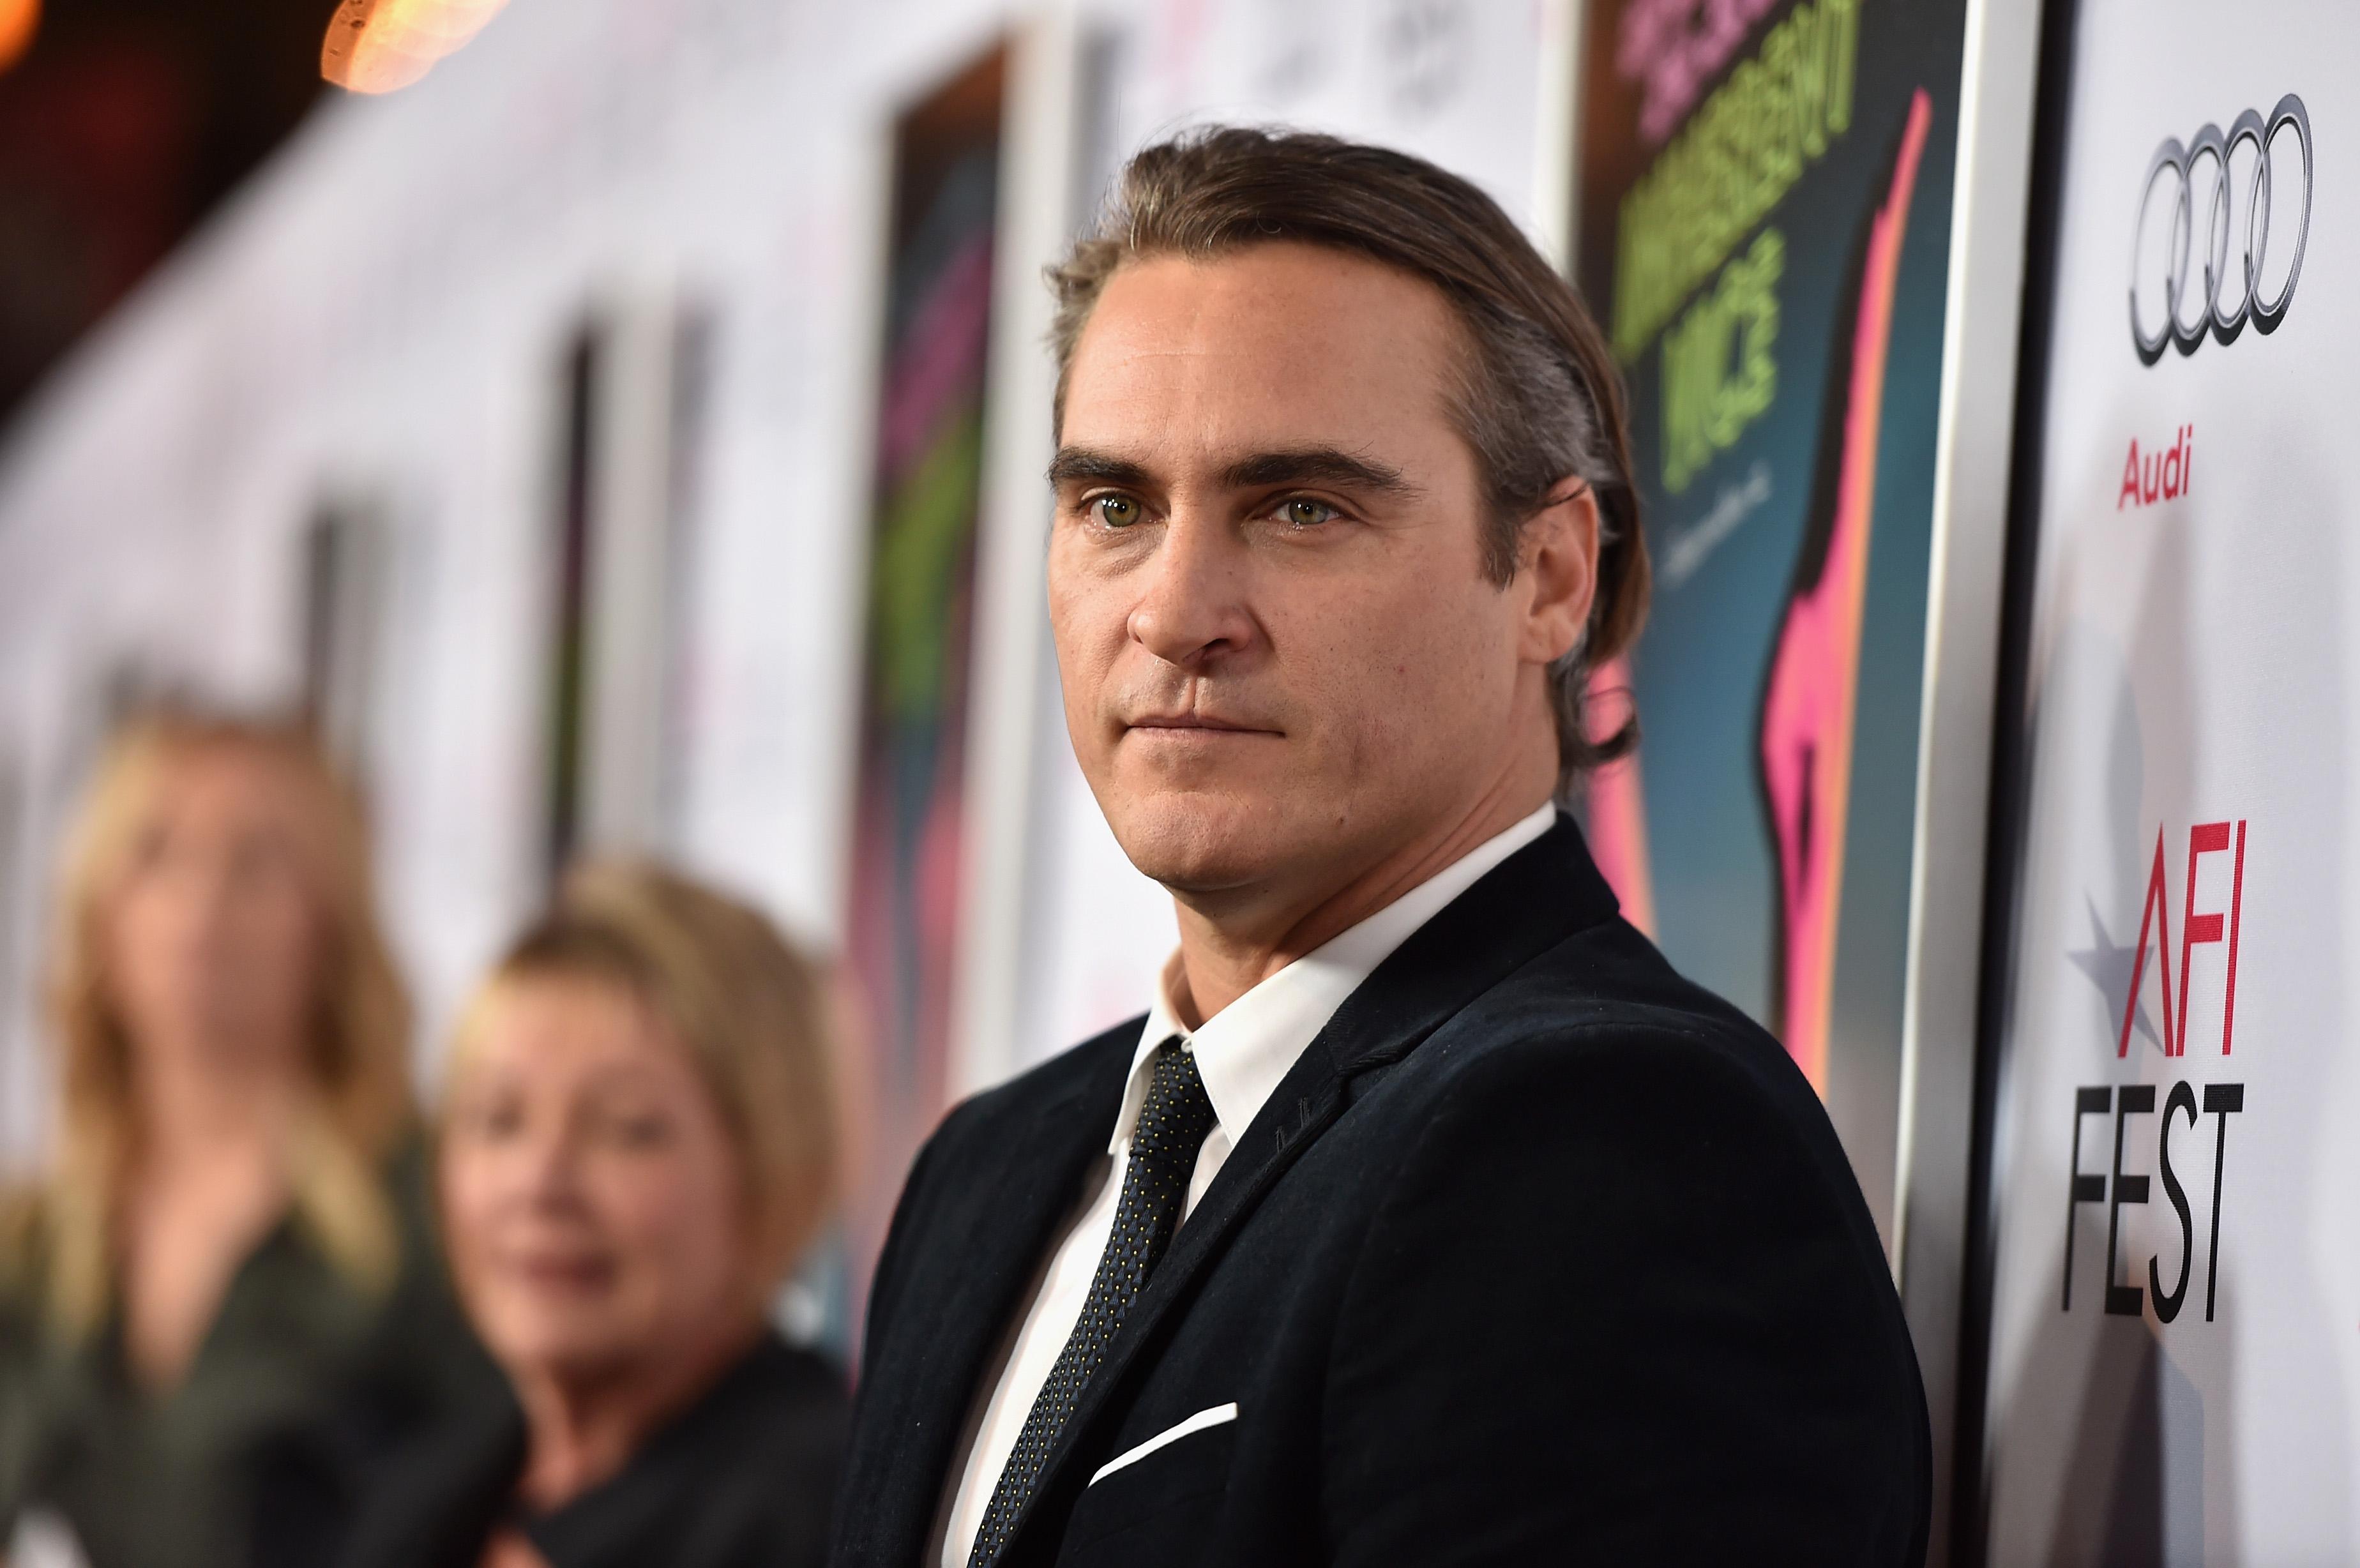 AFI FEST 2014 Presented By Audi Gala Screening Of &#8220;Inherent Vice&#8221; &#8211; Red Carpet